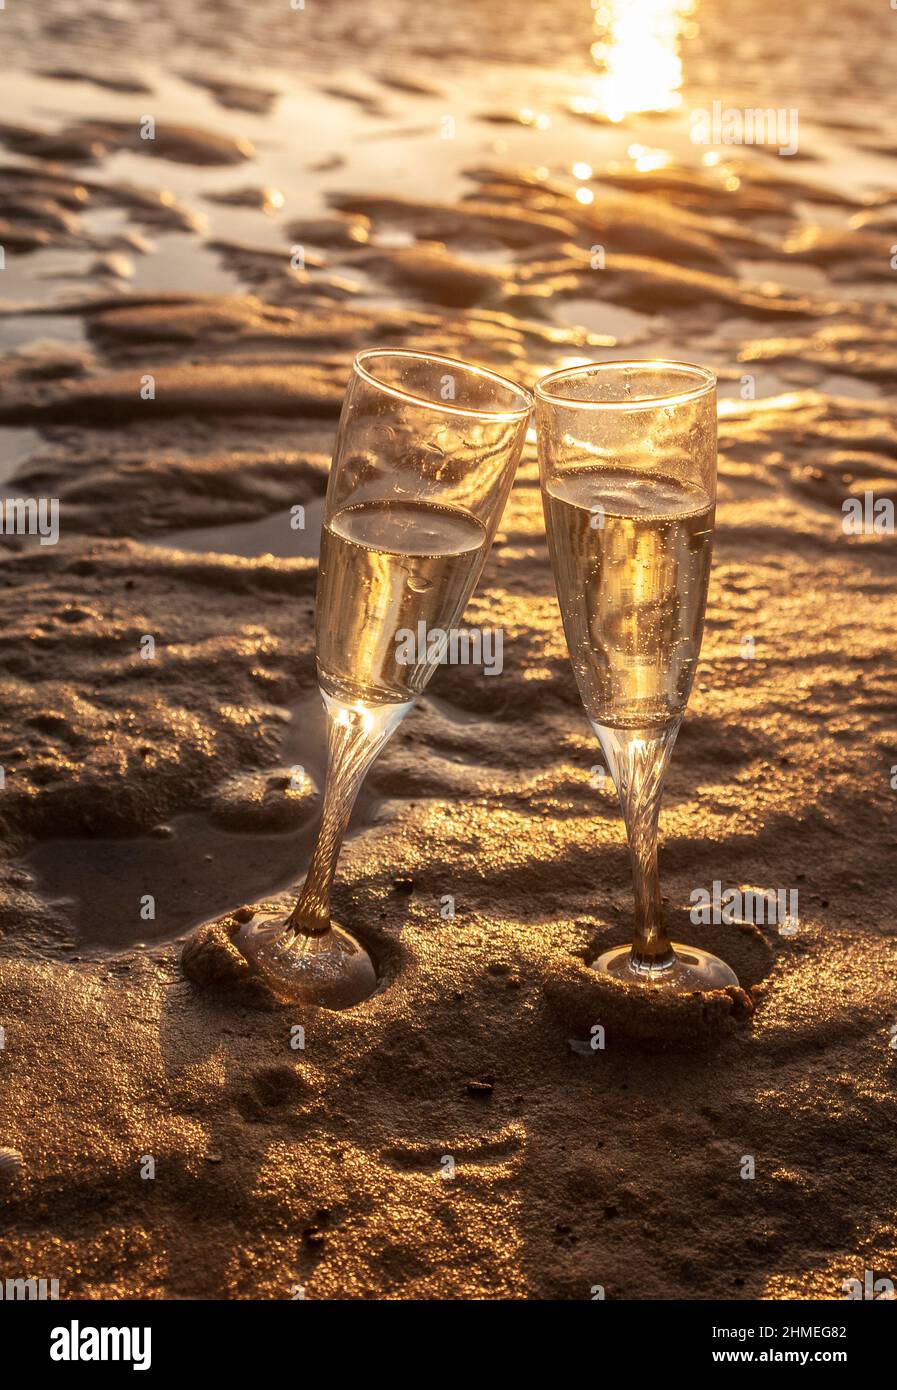 2 Champagne glasses Stock Photo by ©magann 19315611